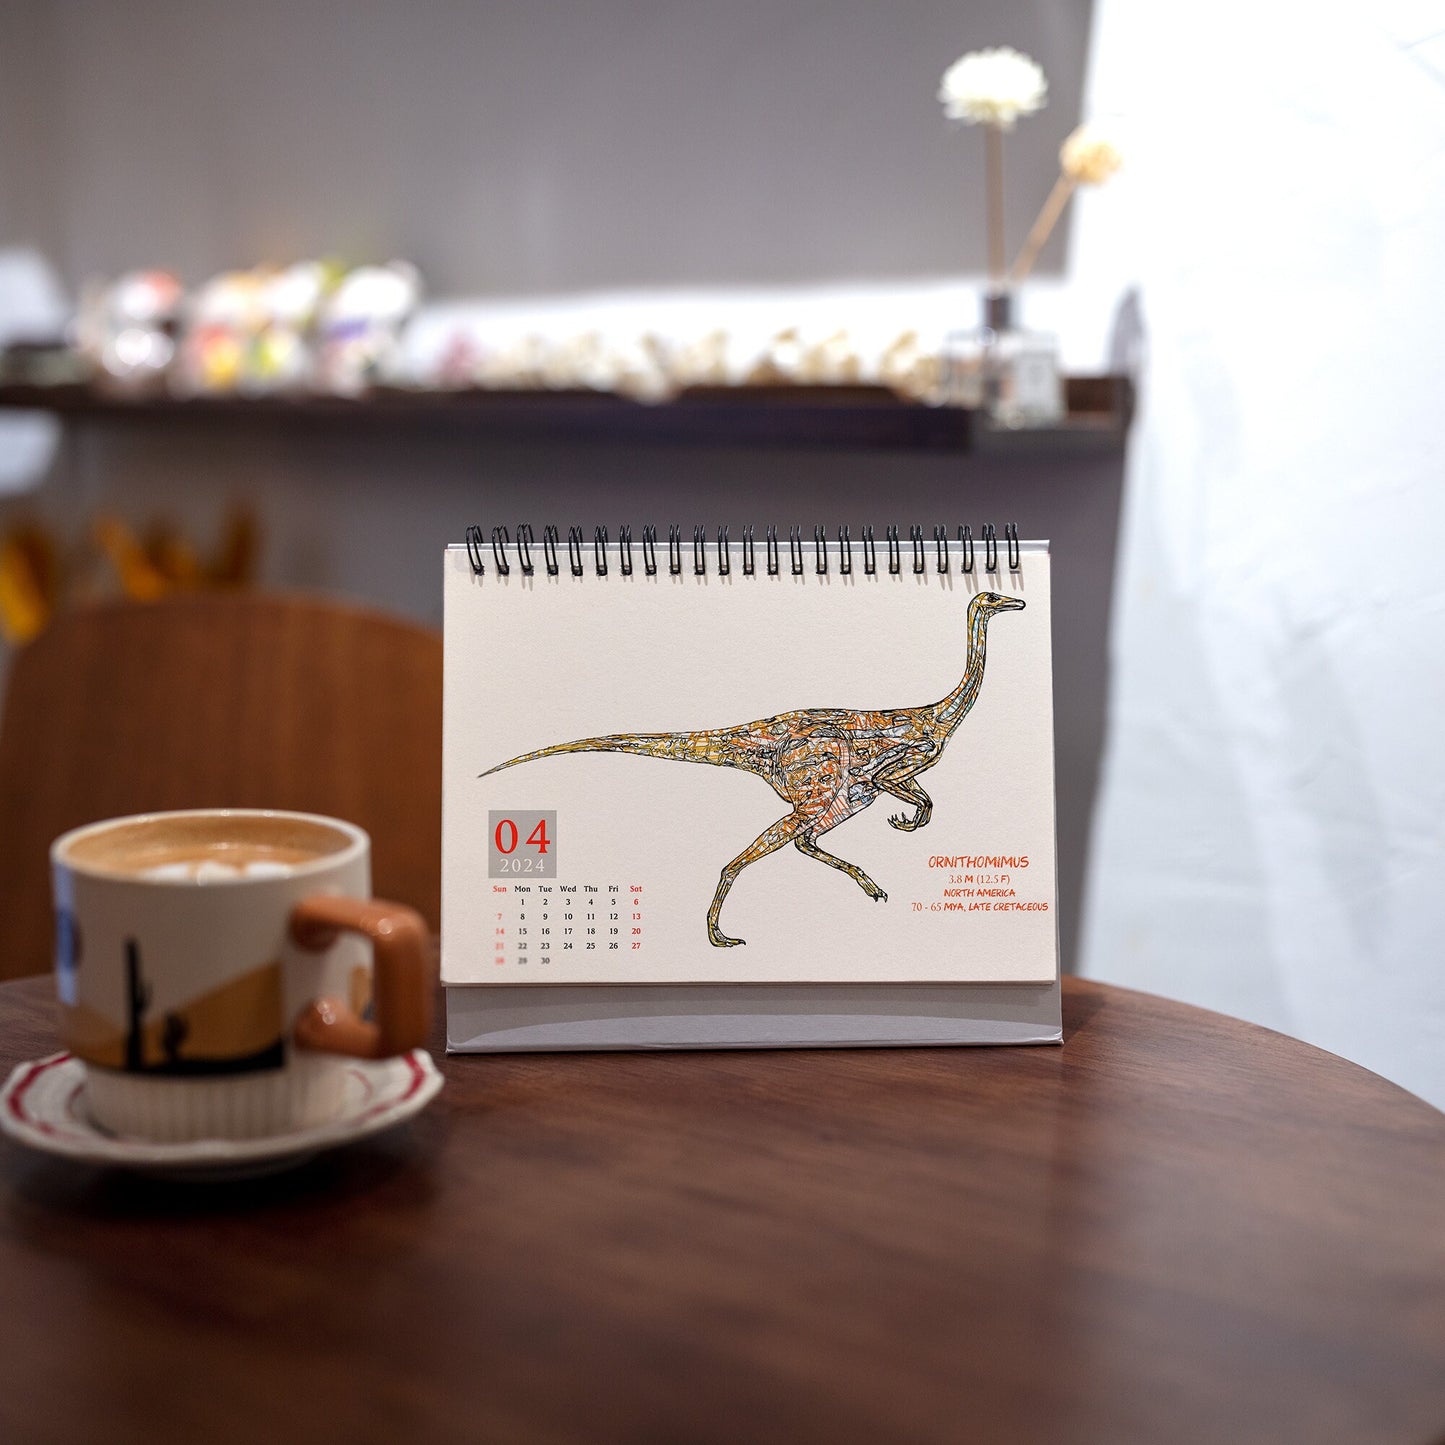 2024 Dinosaur Original Illustration Calendar - Minimalist Style, A5 Size Pages, Backed with Scheduling Grid